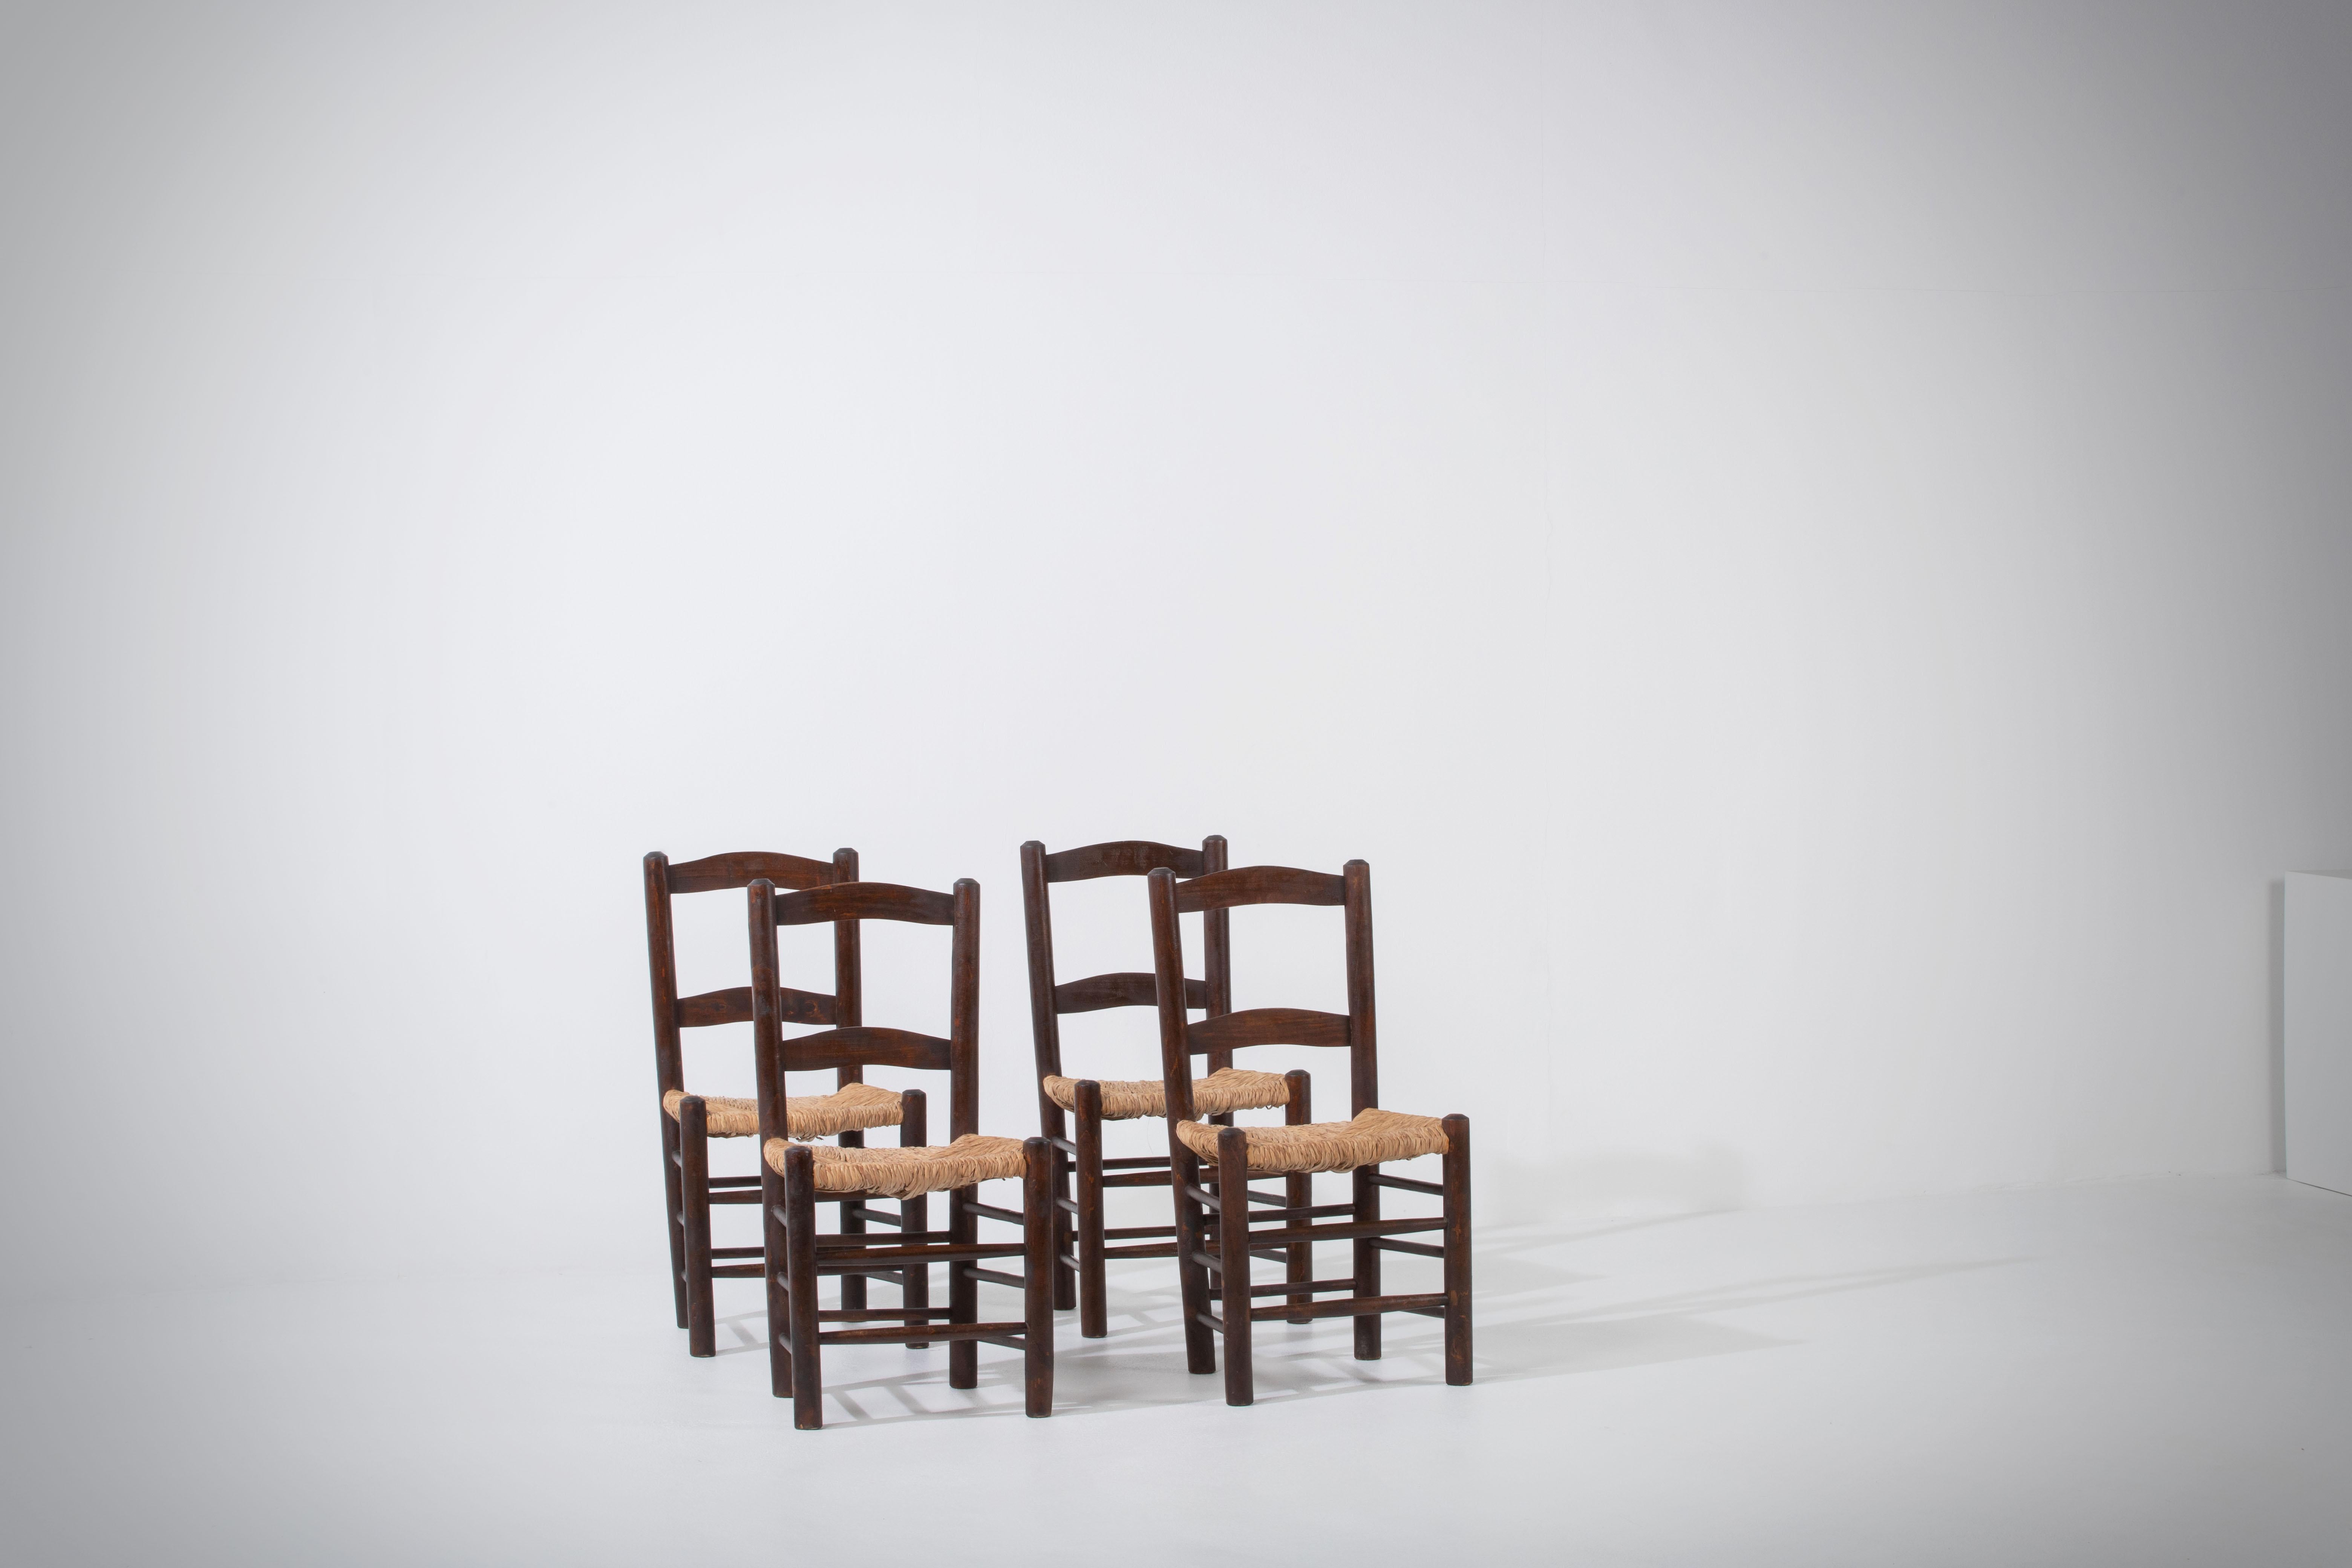 Presenting a set of oak and rush chairs inspired by the iconic style of Charlotte Perriand, a renowned French designer. Crafted in France around the 1960s, these chairs embody the timeless elegance and craftsmanship of the era.

The chairs feature